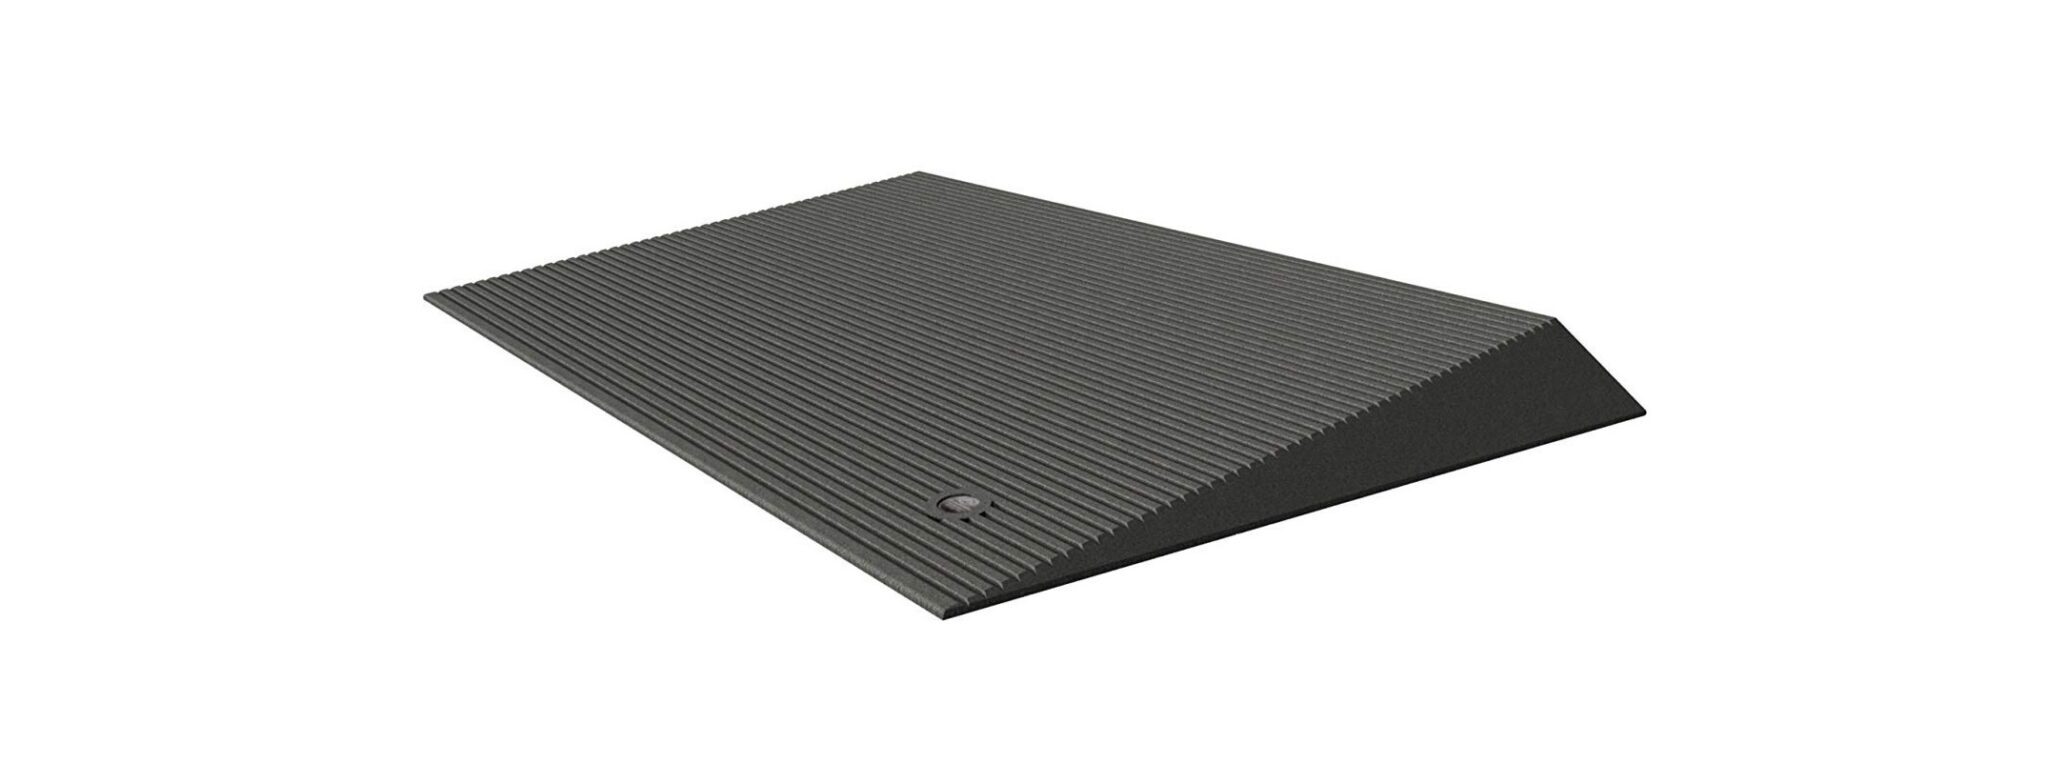 EZ-ACCESS TAEM 1.5-1 Transitions Angled Entry Mat